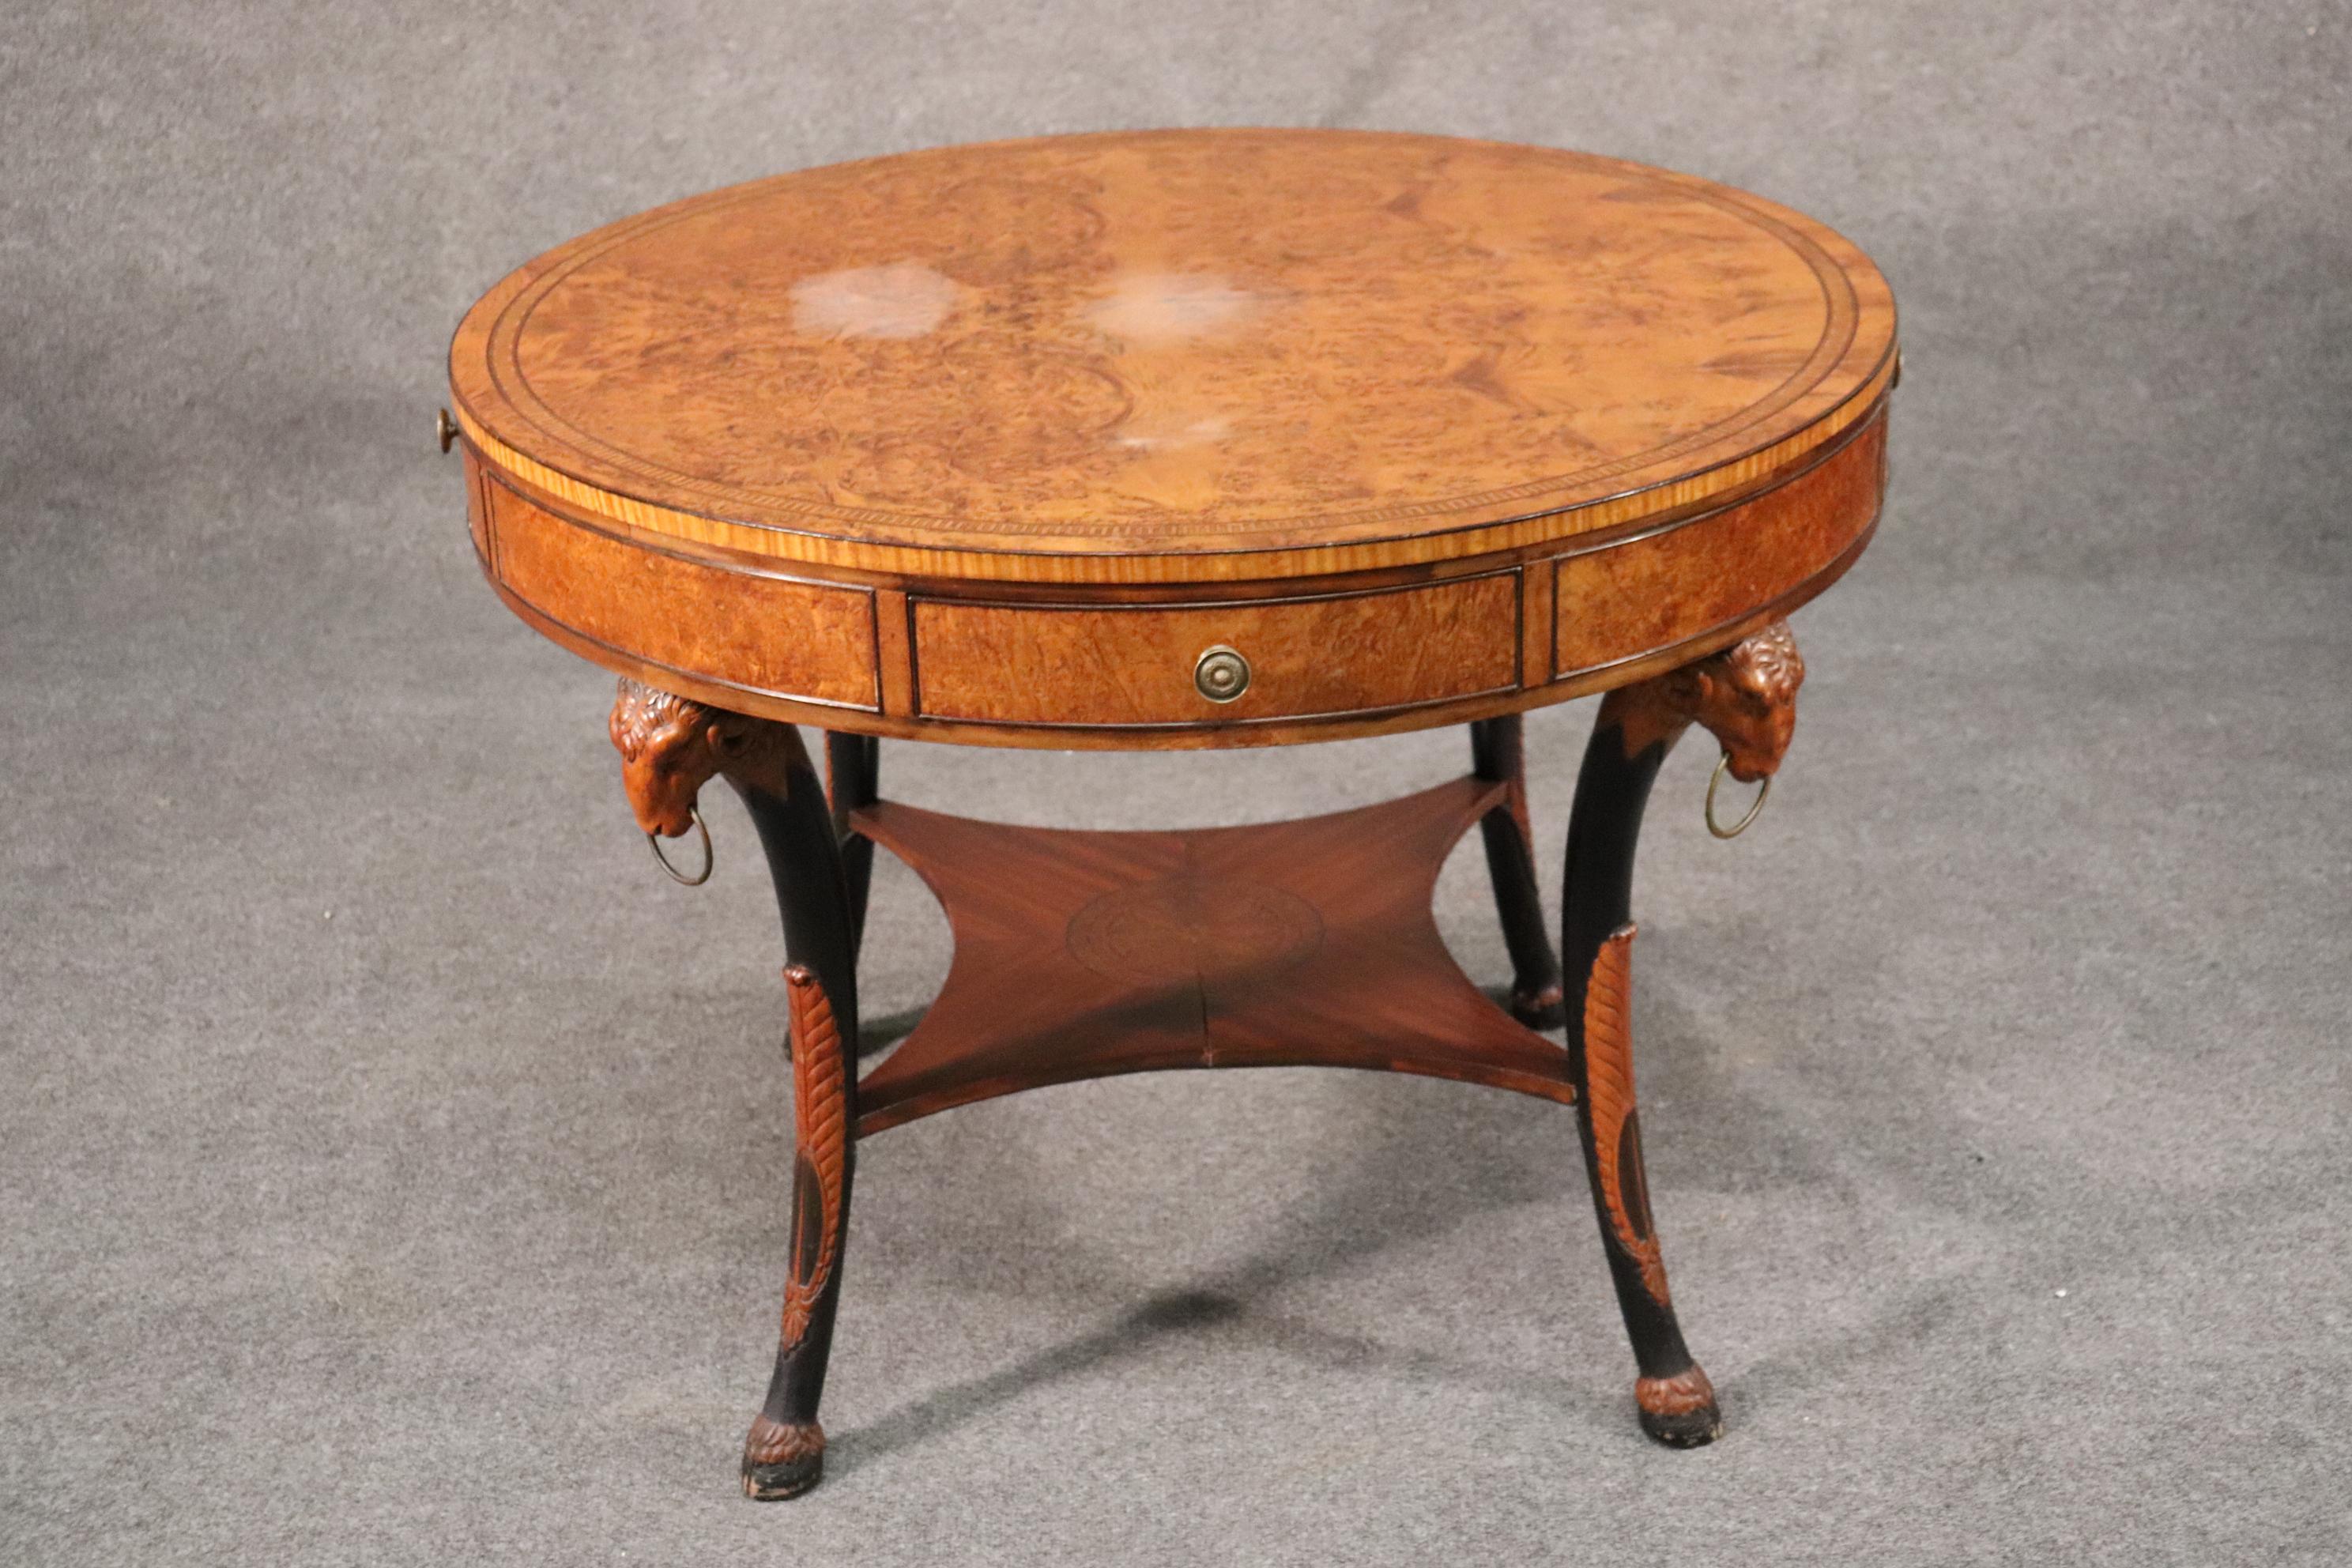 This is a beautifylly carved and designed burled walnut center table with expertly carved rams heads. The wood quality and overall quality of the table is superb. The table dates to the 1940s and does have some hazy areas on top. The table measures